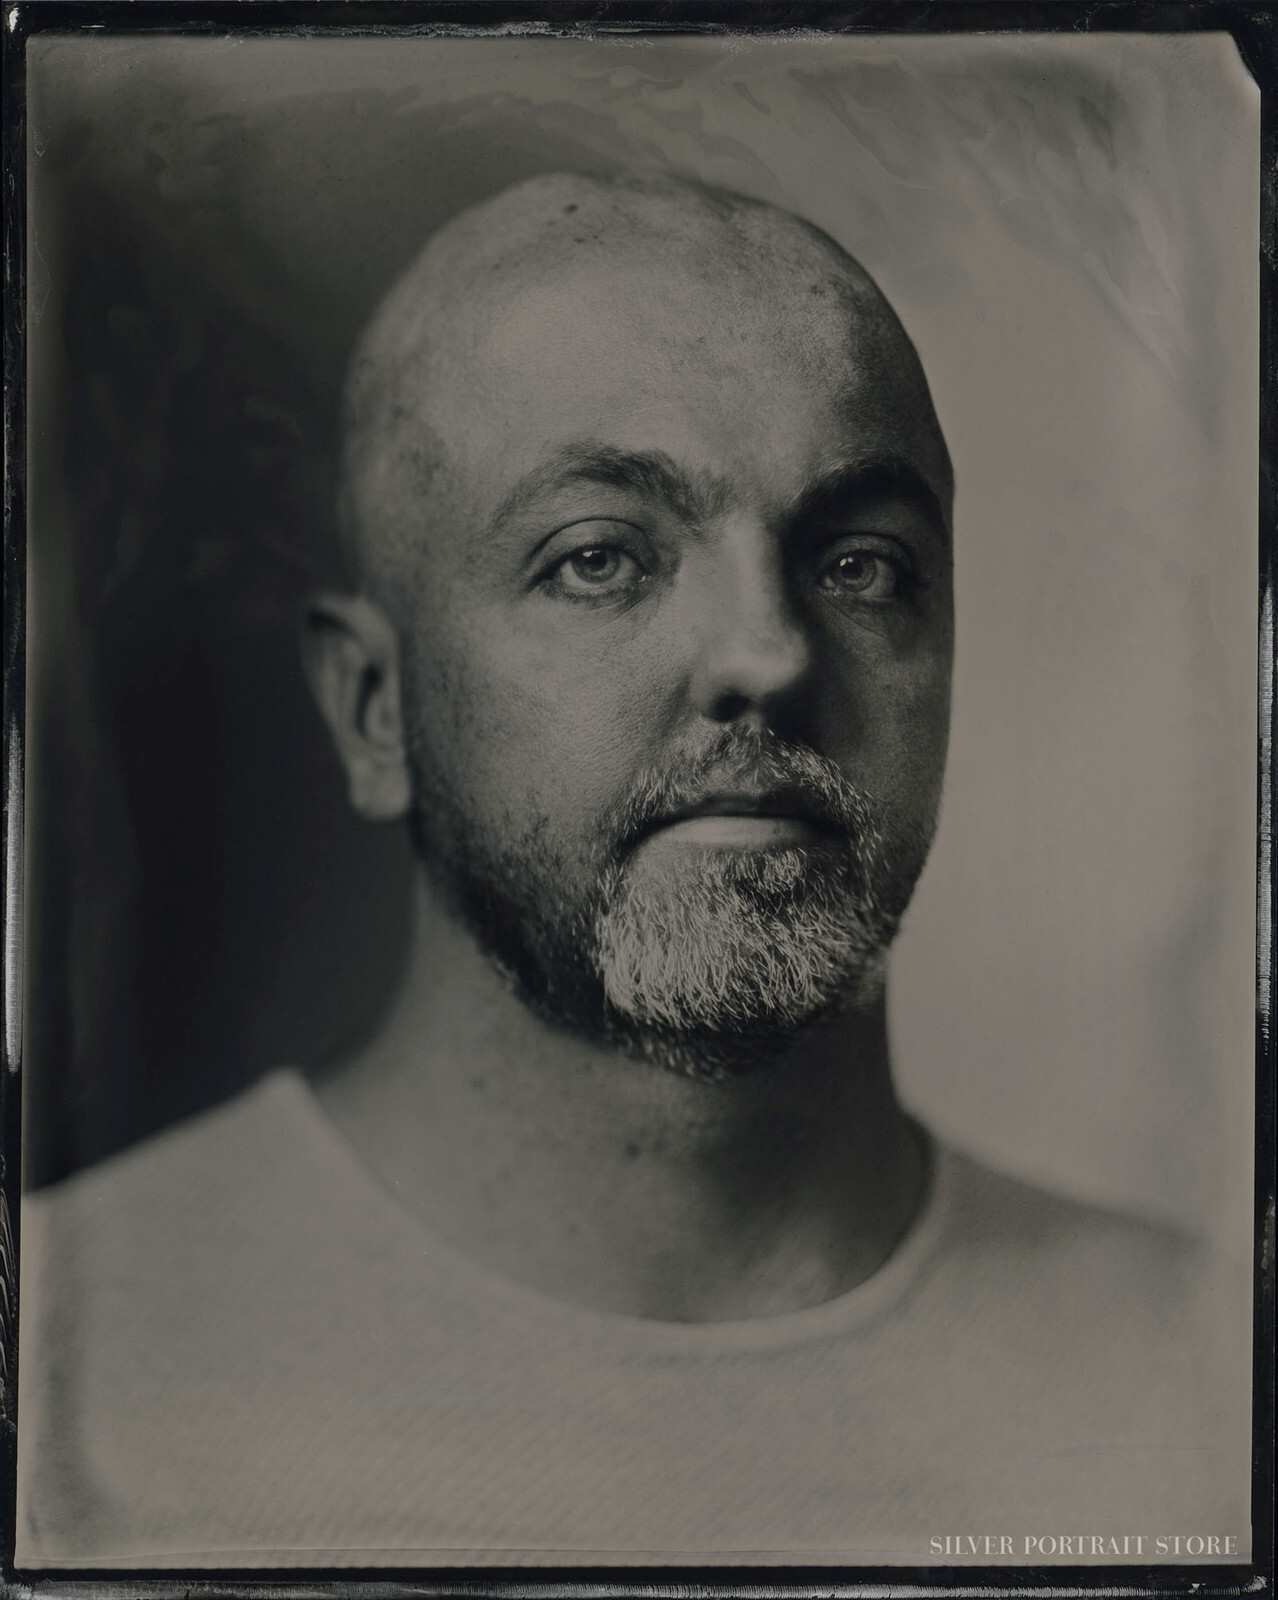 Floris-Silver Portrait Store-scan from Wet plate collodion-Tintype10 x 12 cm.